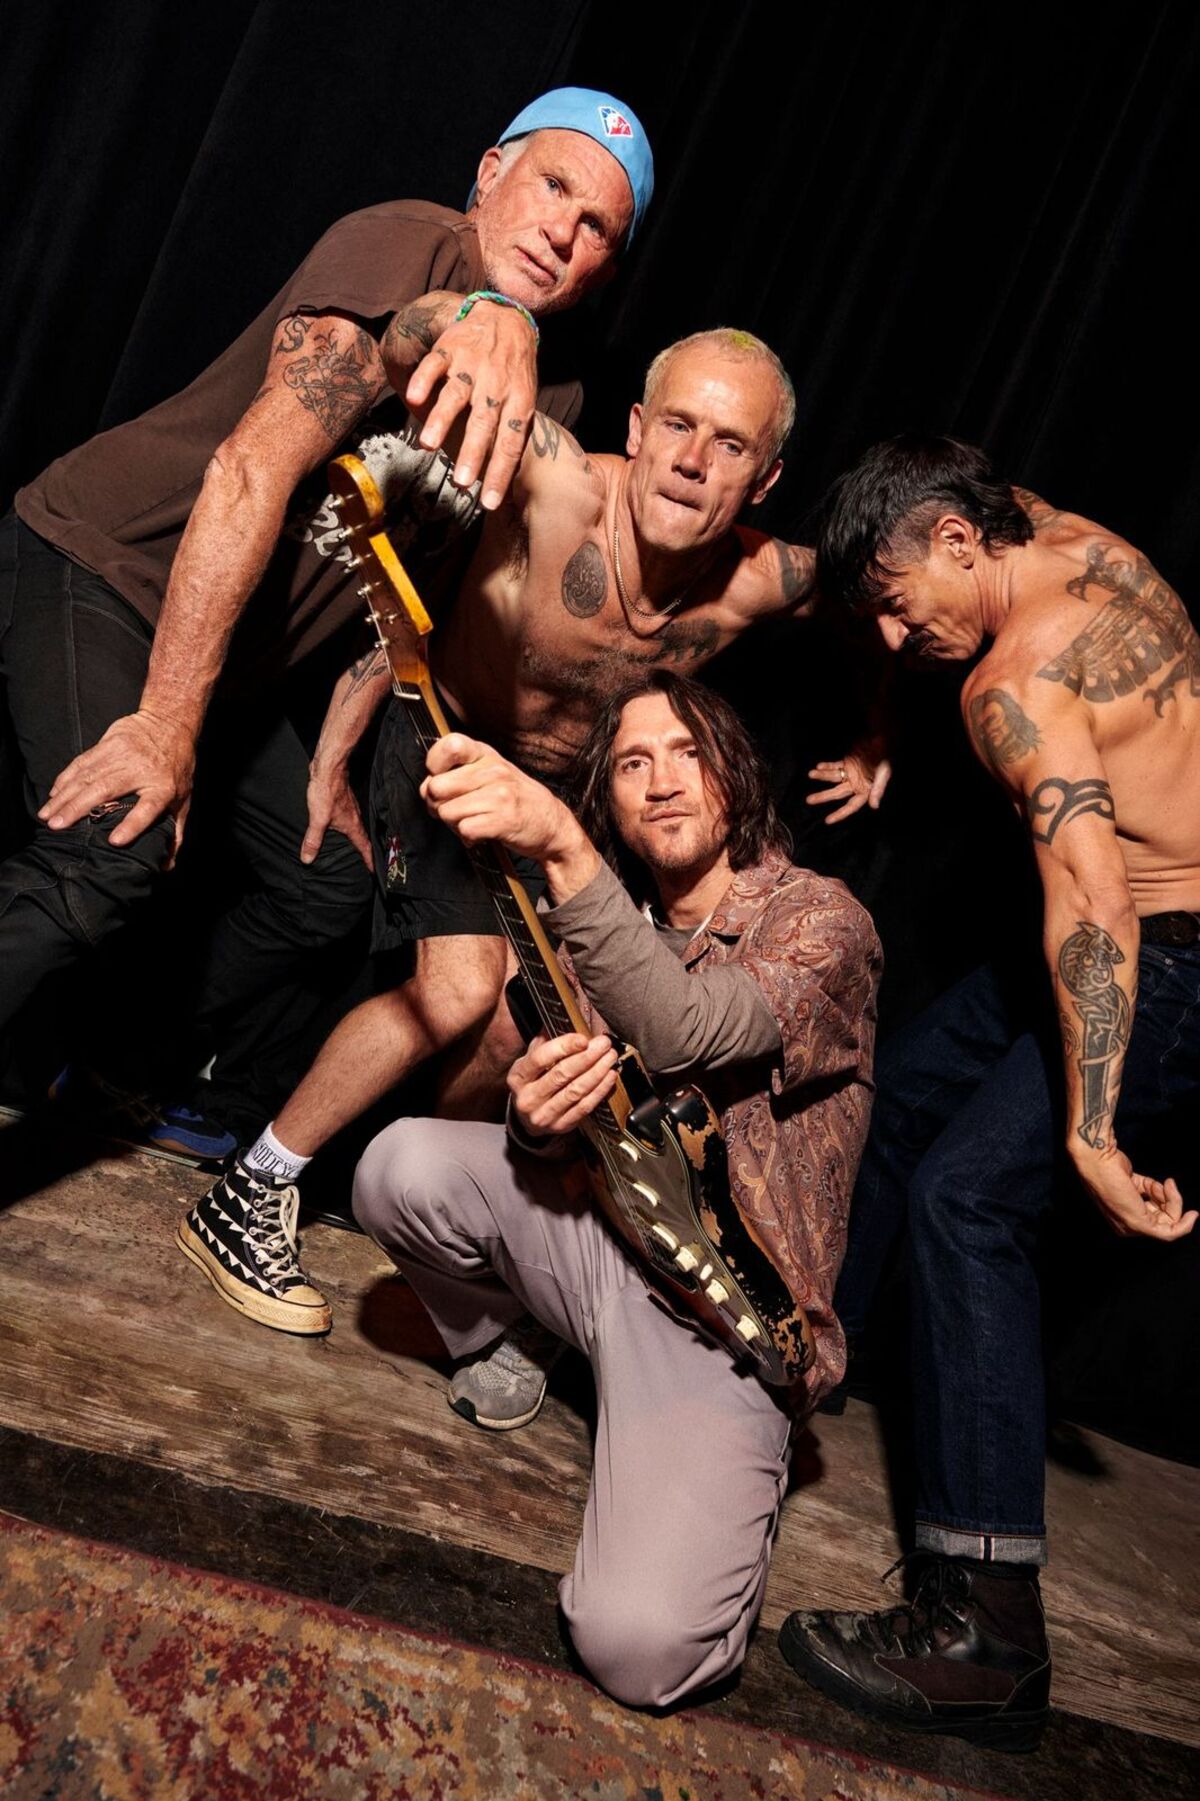 RED HOT CHILI PEPPERS、5月に来日公演決定！ベスト・ヒット満載の 